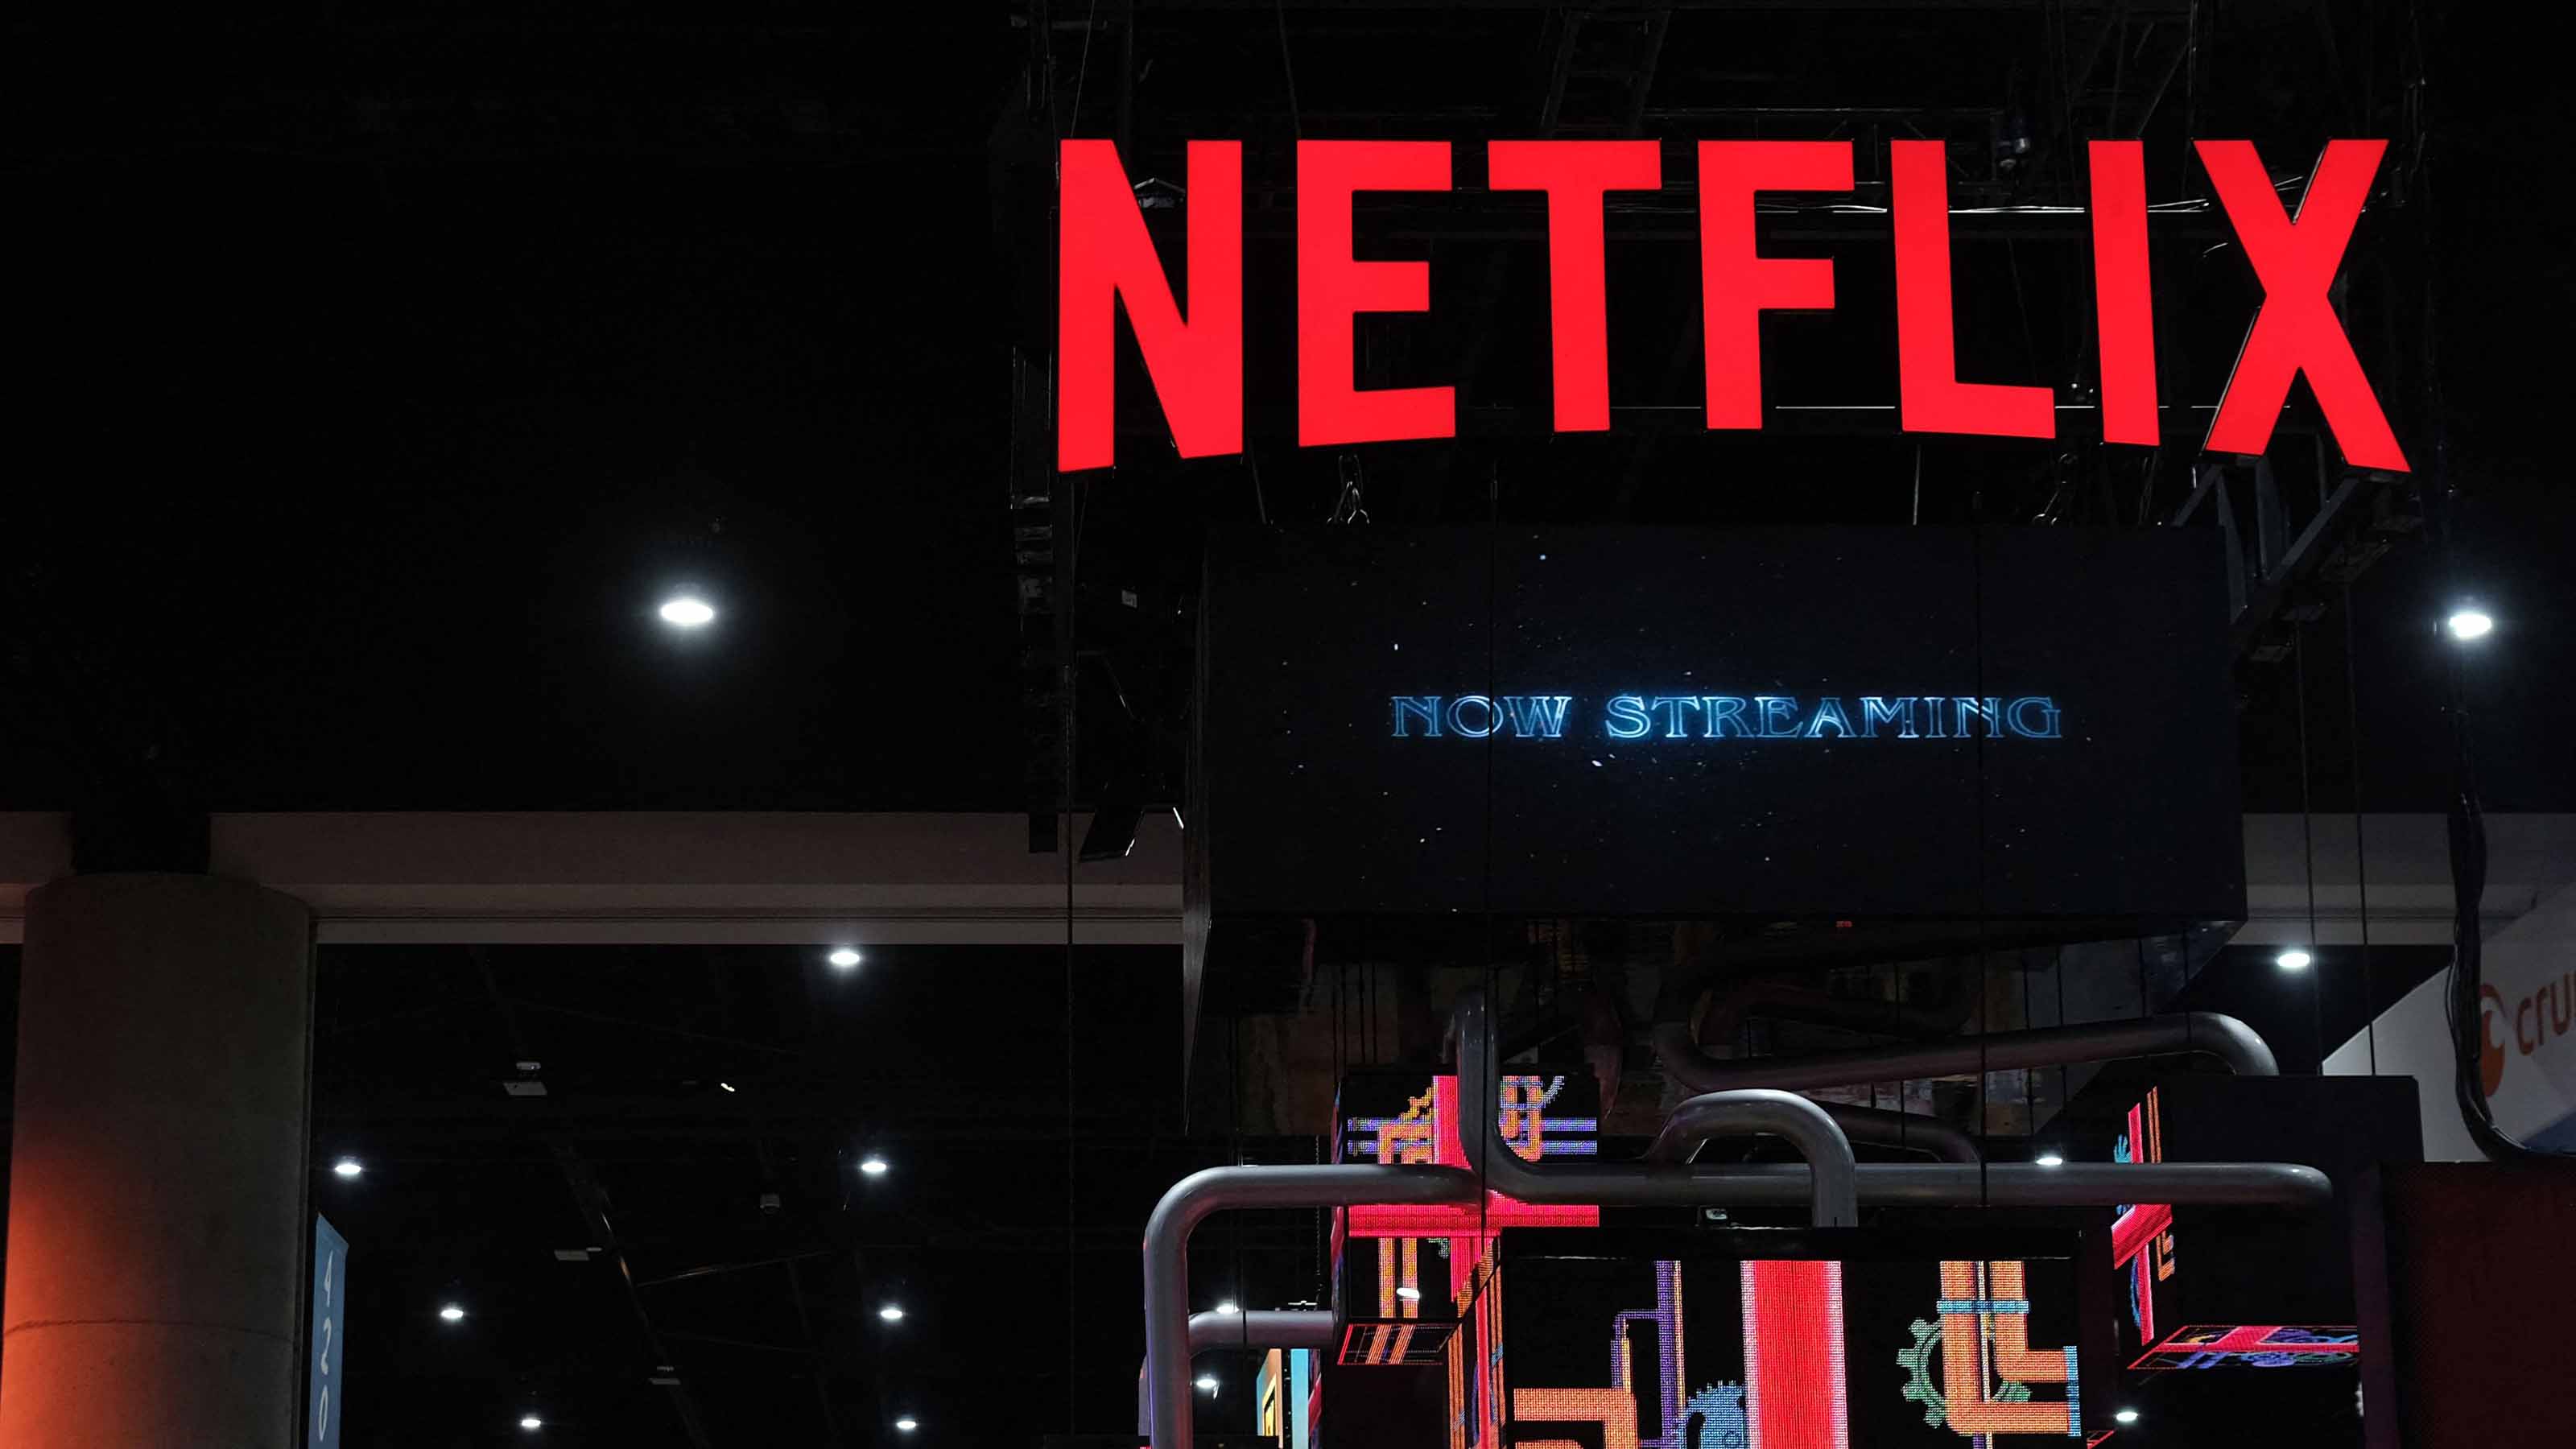 Netflix to charge $8 extra per month for out-of-household viewers